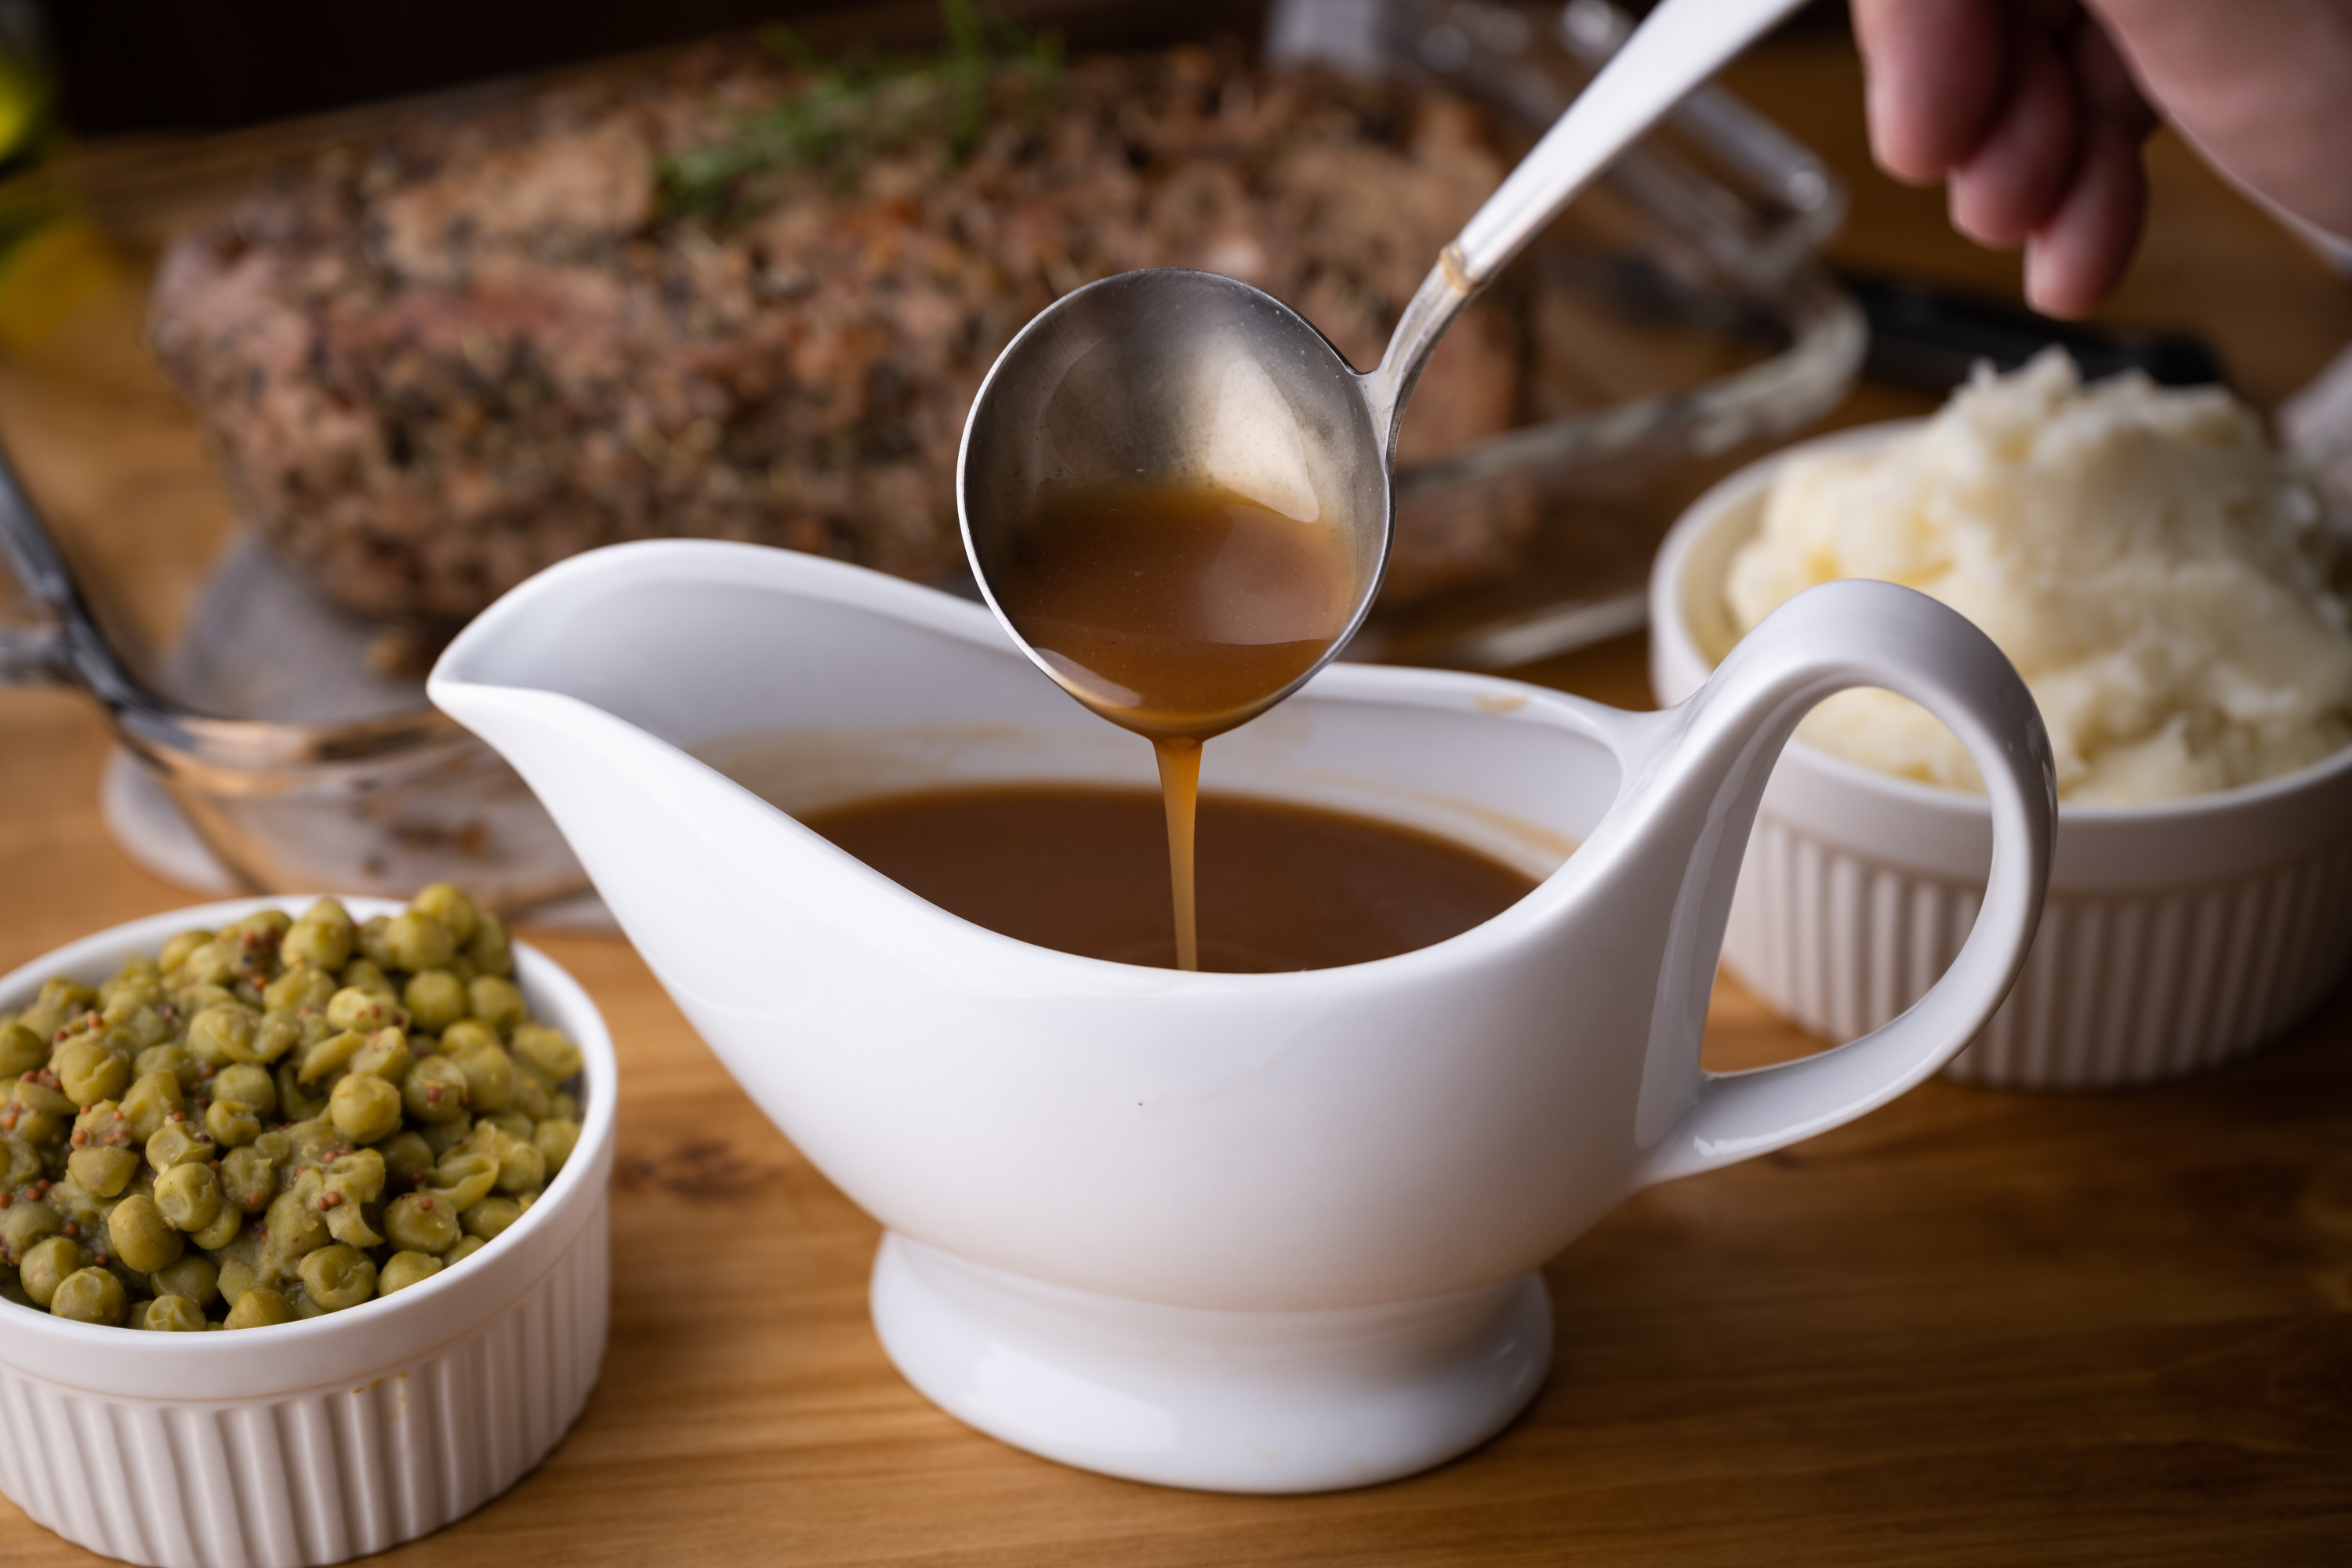 a ladle and gravy tray with brown gravy inside